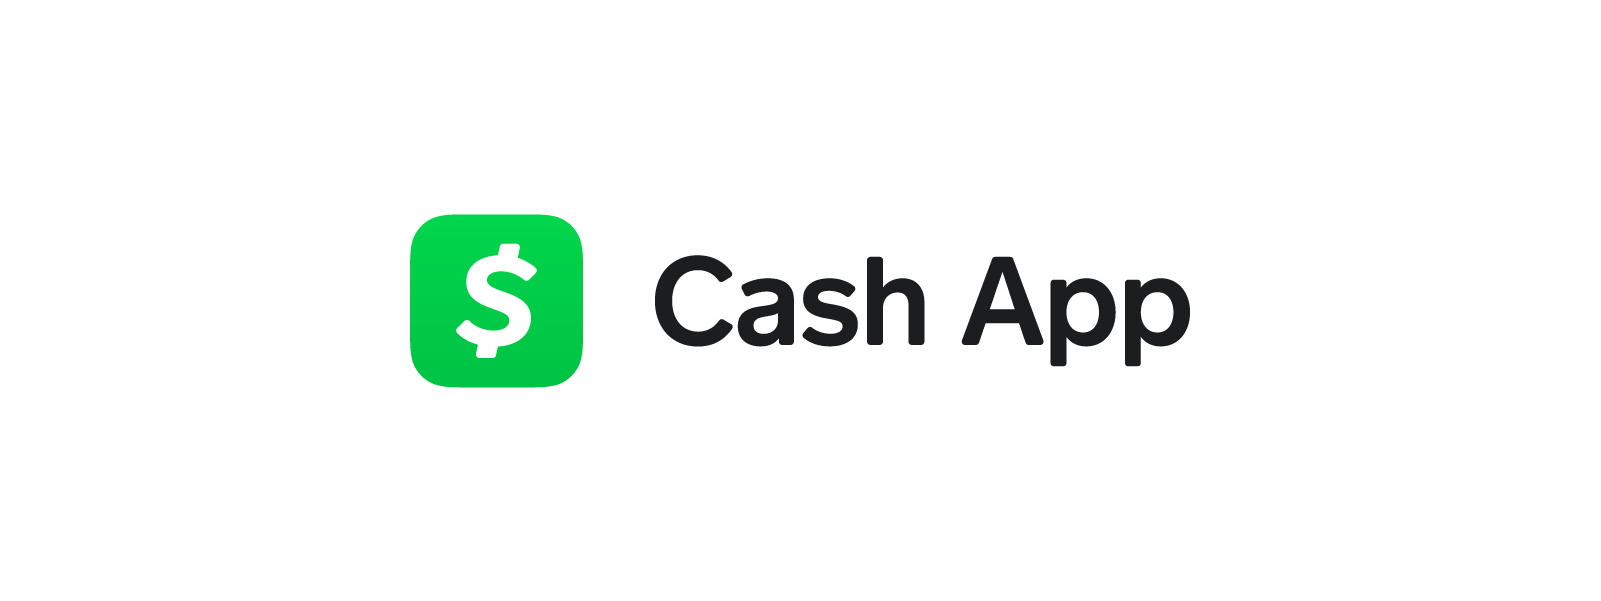 Review: Cash App Investing | The Ascent